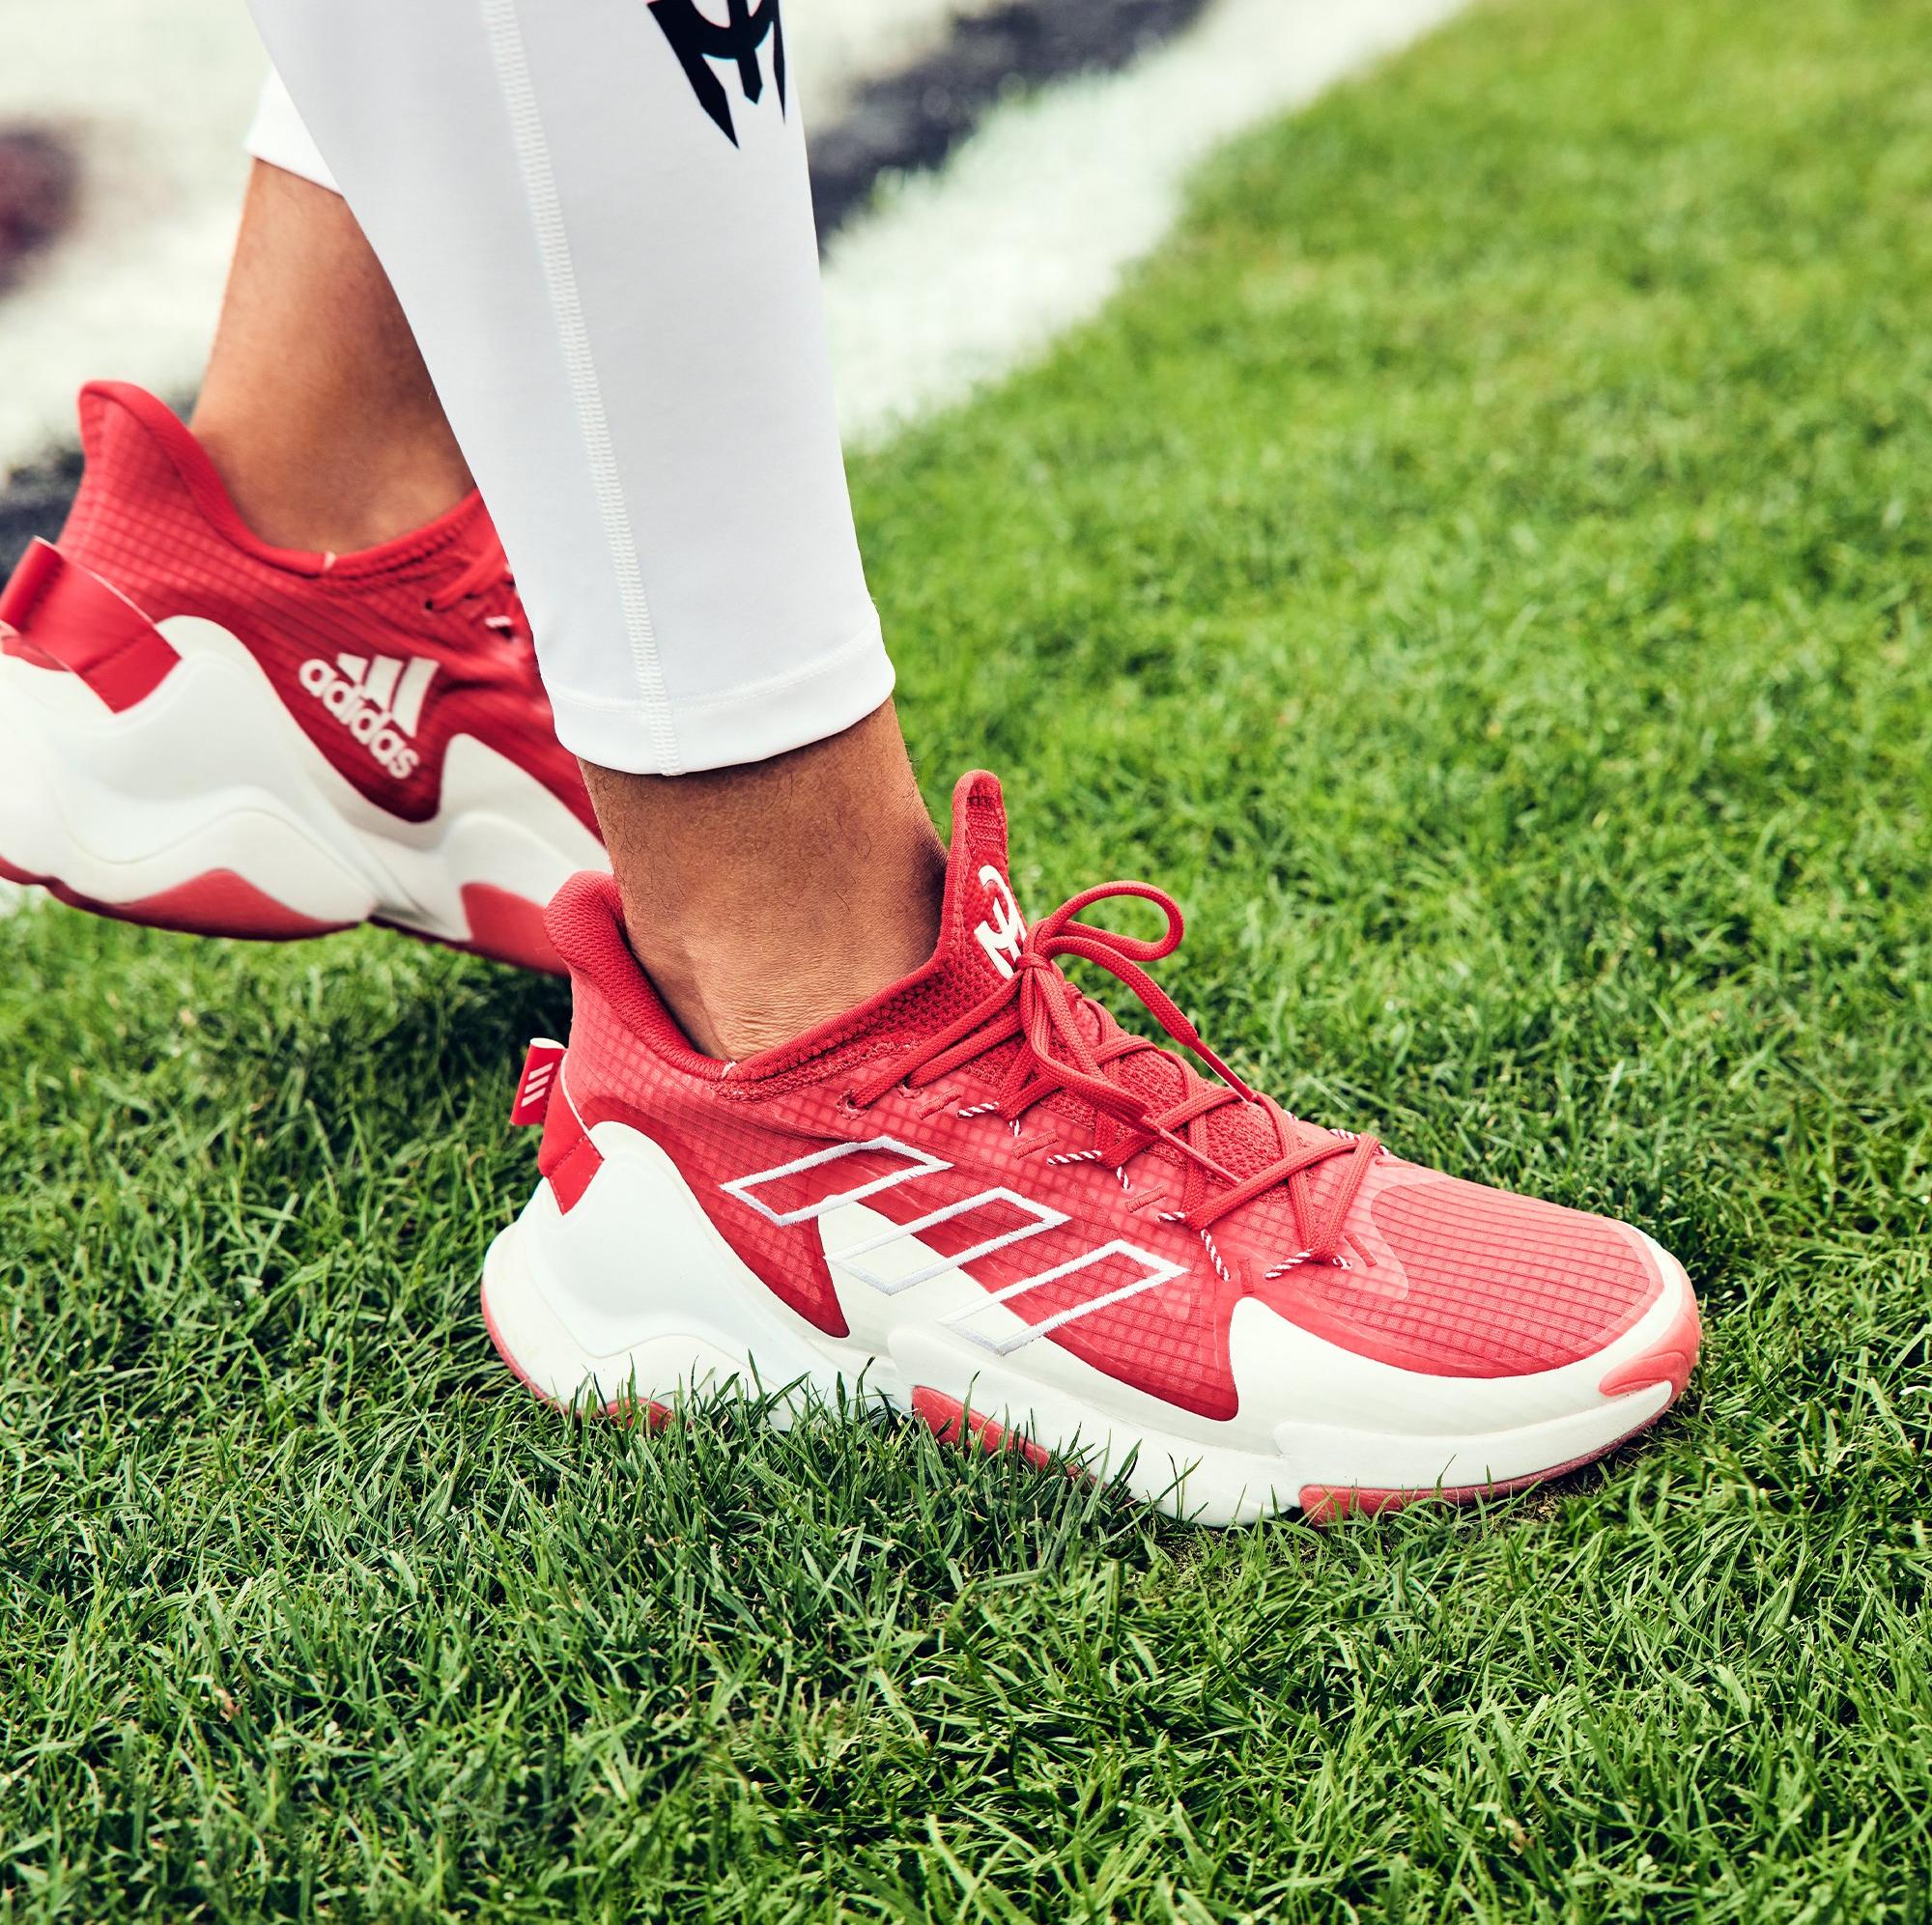 Sneakers Release &#8211; adidas Mahomes 1 Impact FLX &#8220;Red/White&#8221; Men&#8217;s School Kids&#8217; Shoe Launching 11/1